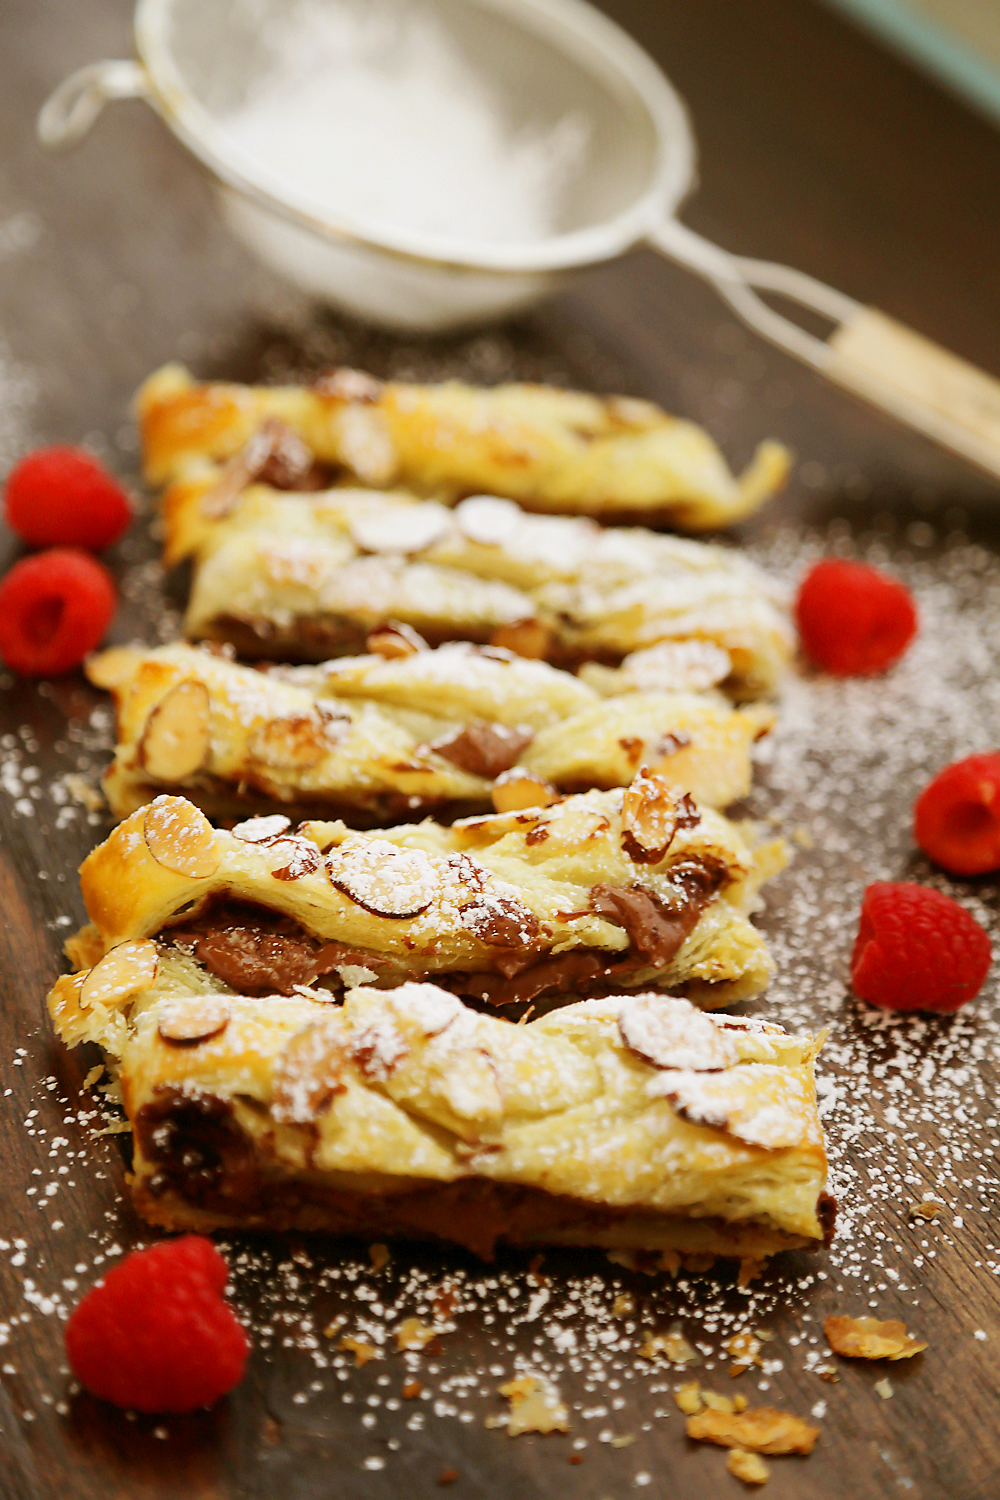 Easy Chocolate-Almond Puff Pastry Braid - So quick & easy! Bake this 4-ingredient treat for an effortless and impressive dessert. Thecomfortofcooking.com